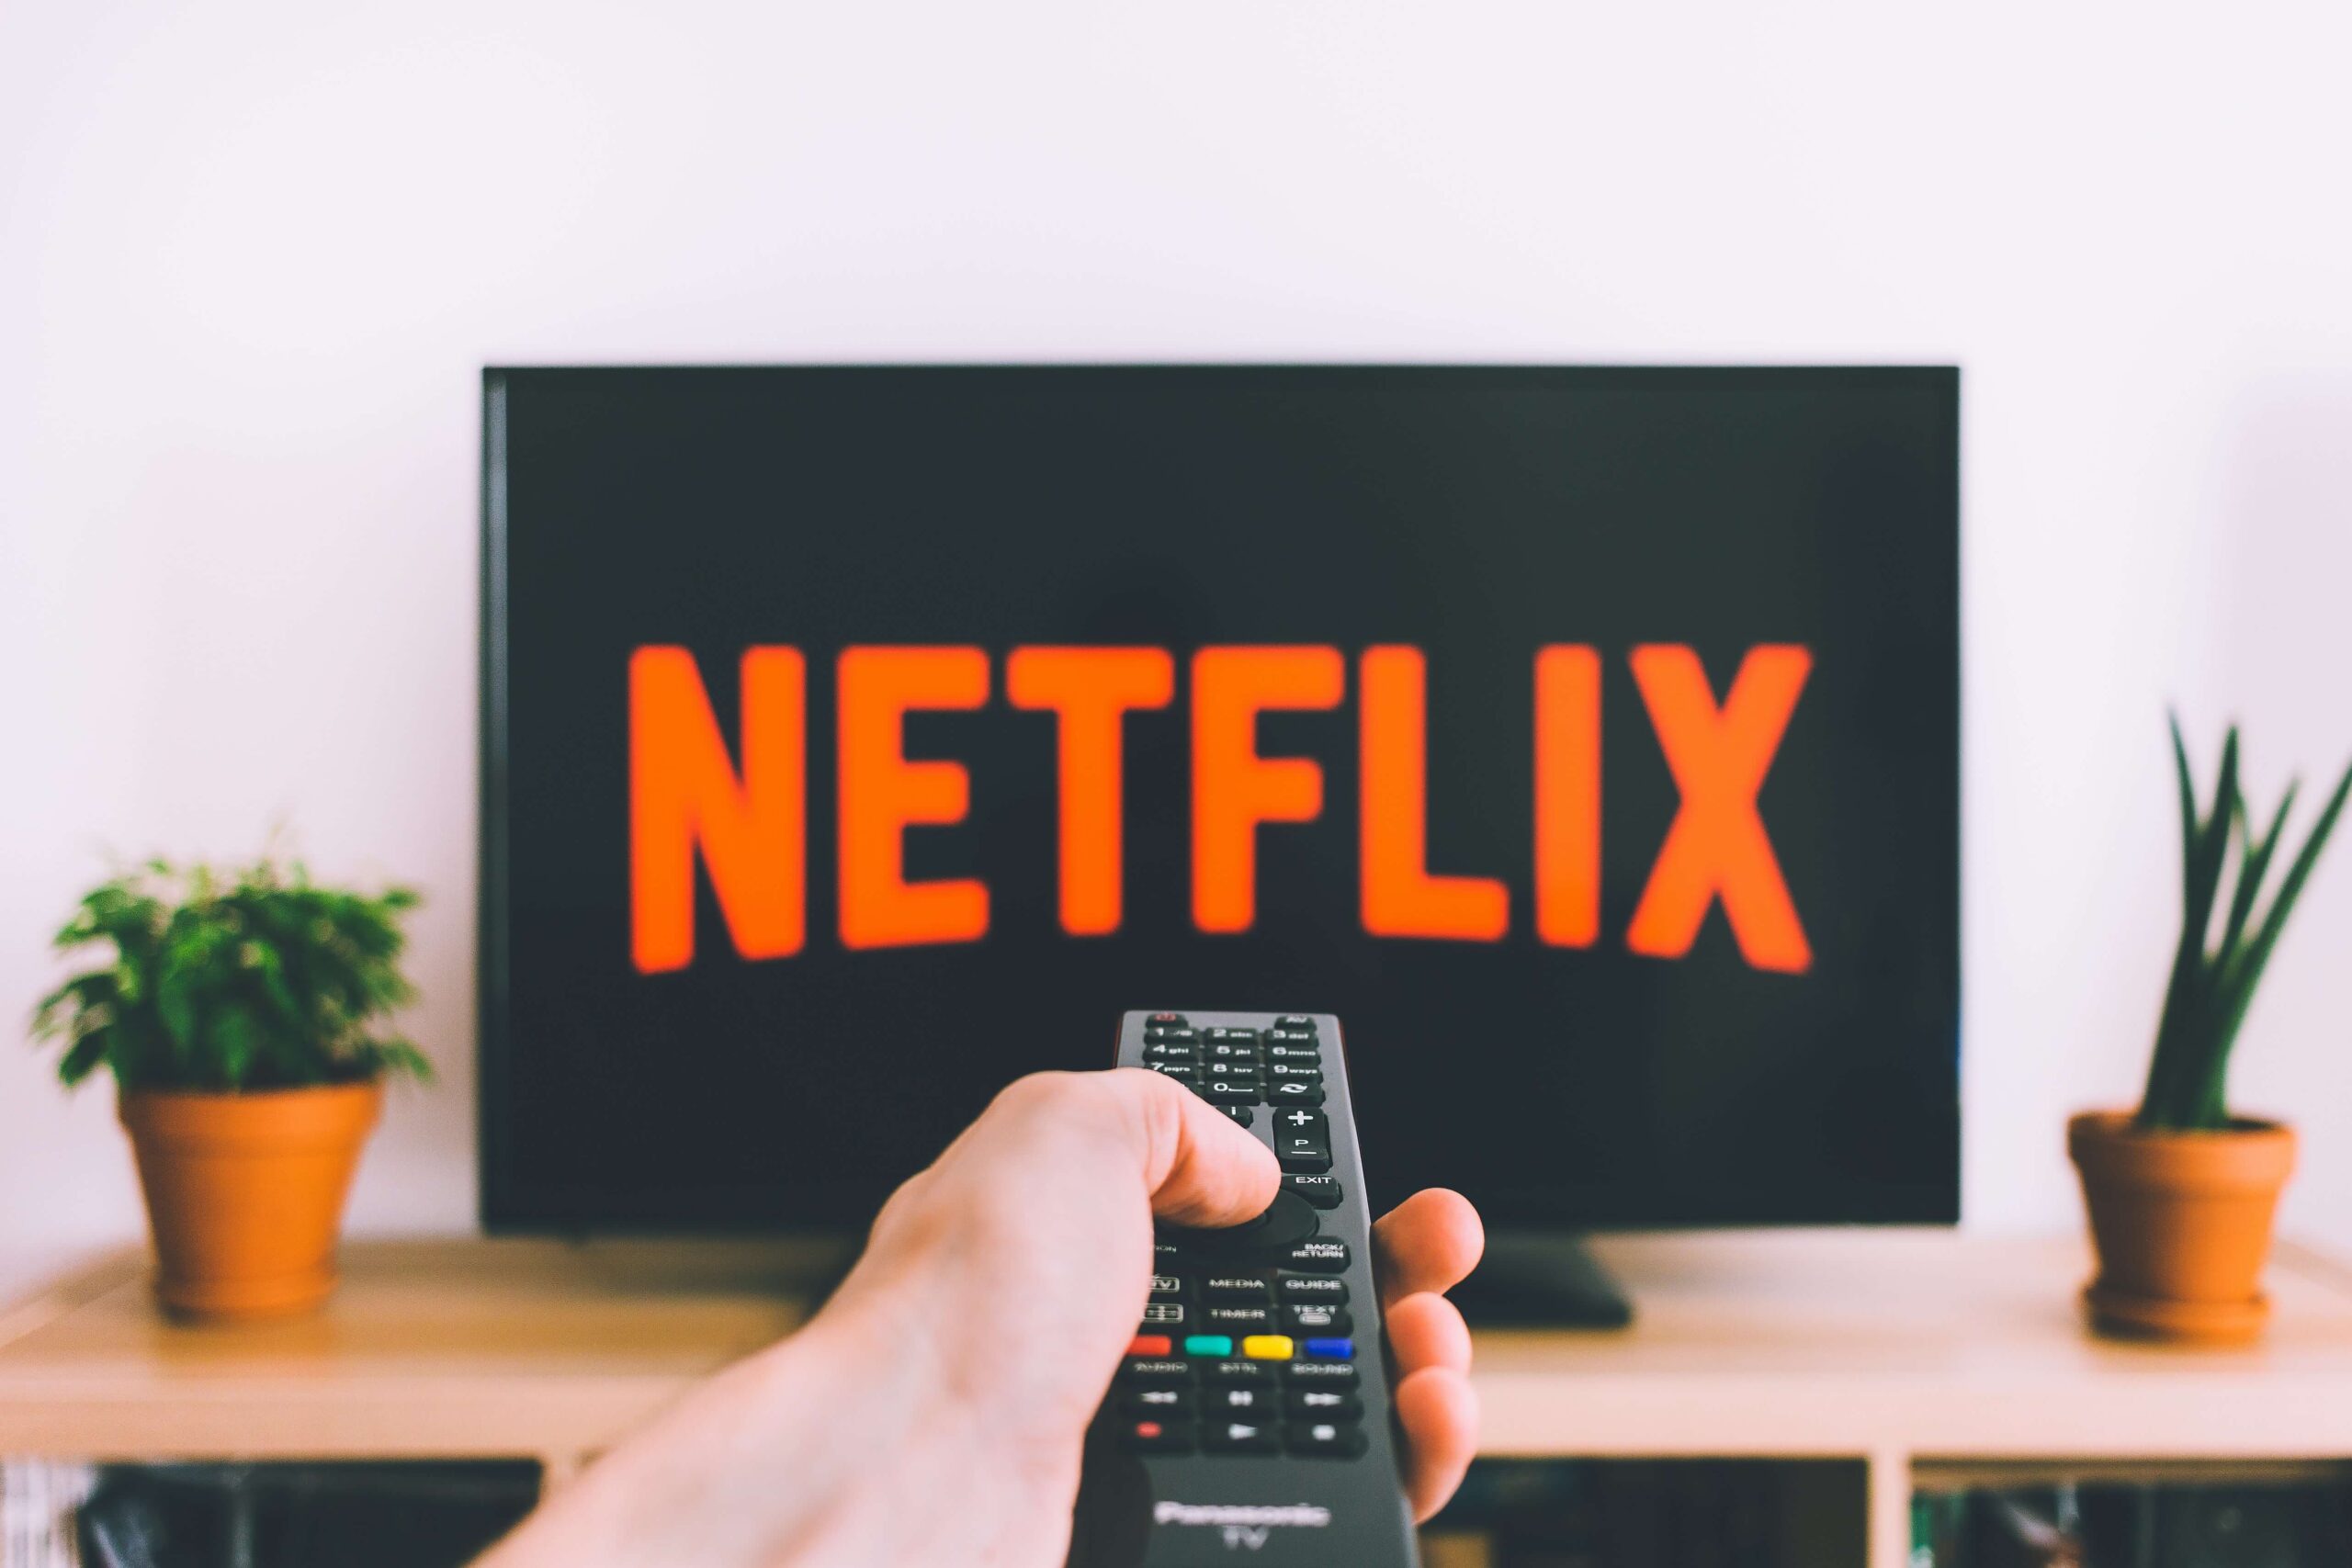 Netflix, one of the video-on-demand streaming services today